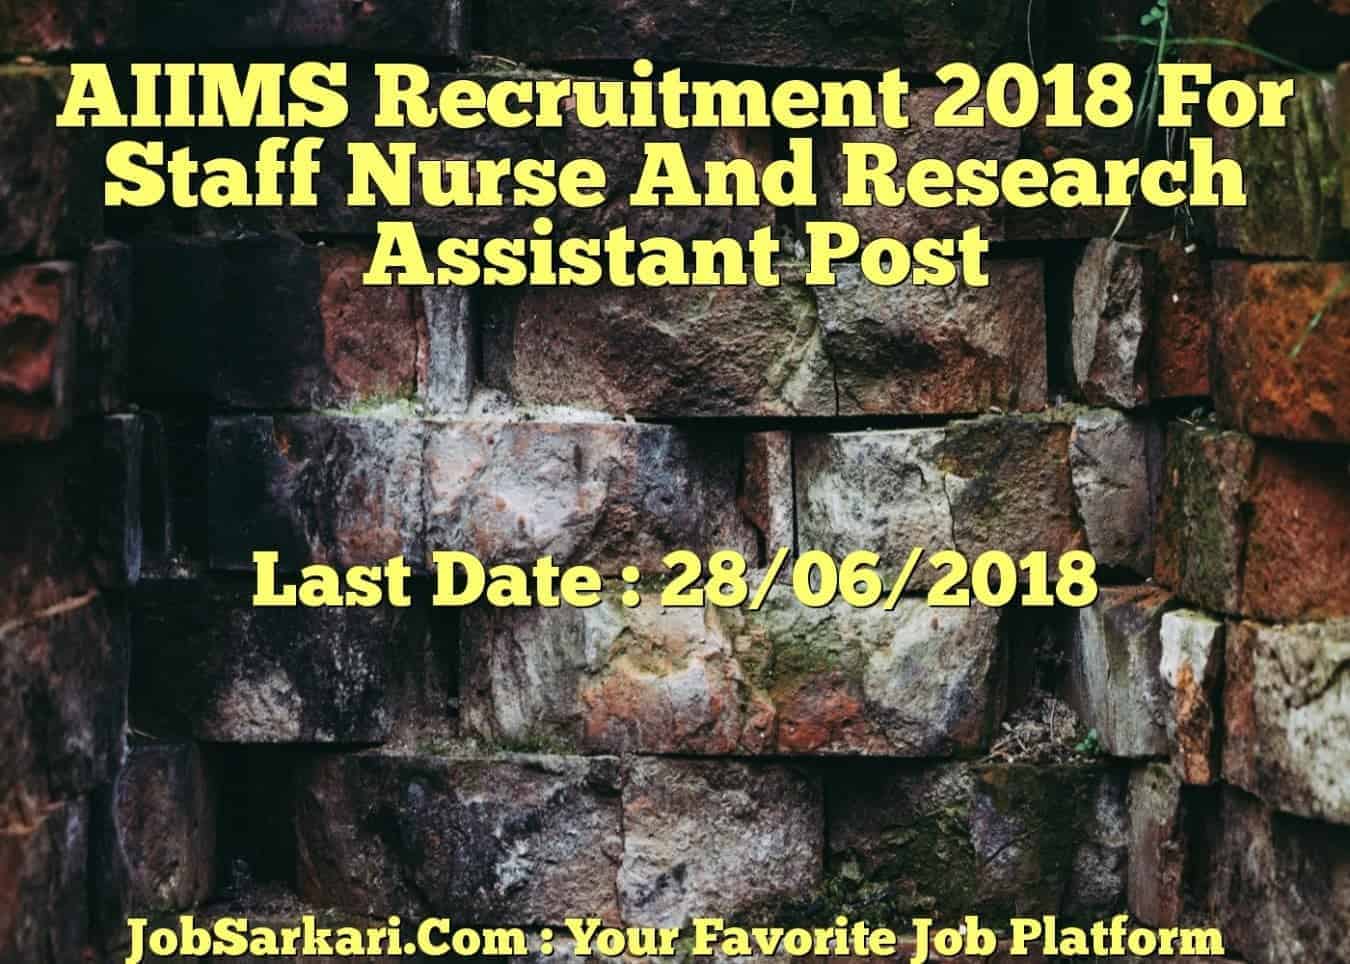 AIIMS Recruitment 2018 For Staff Nurse And Research Assistant Post